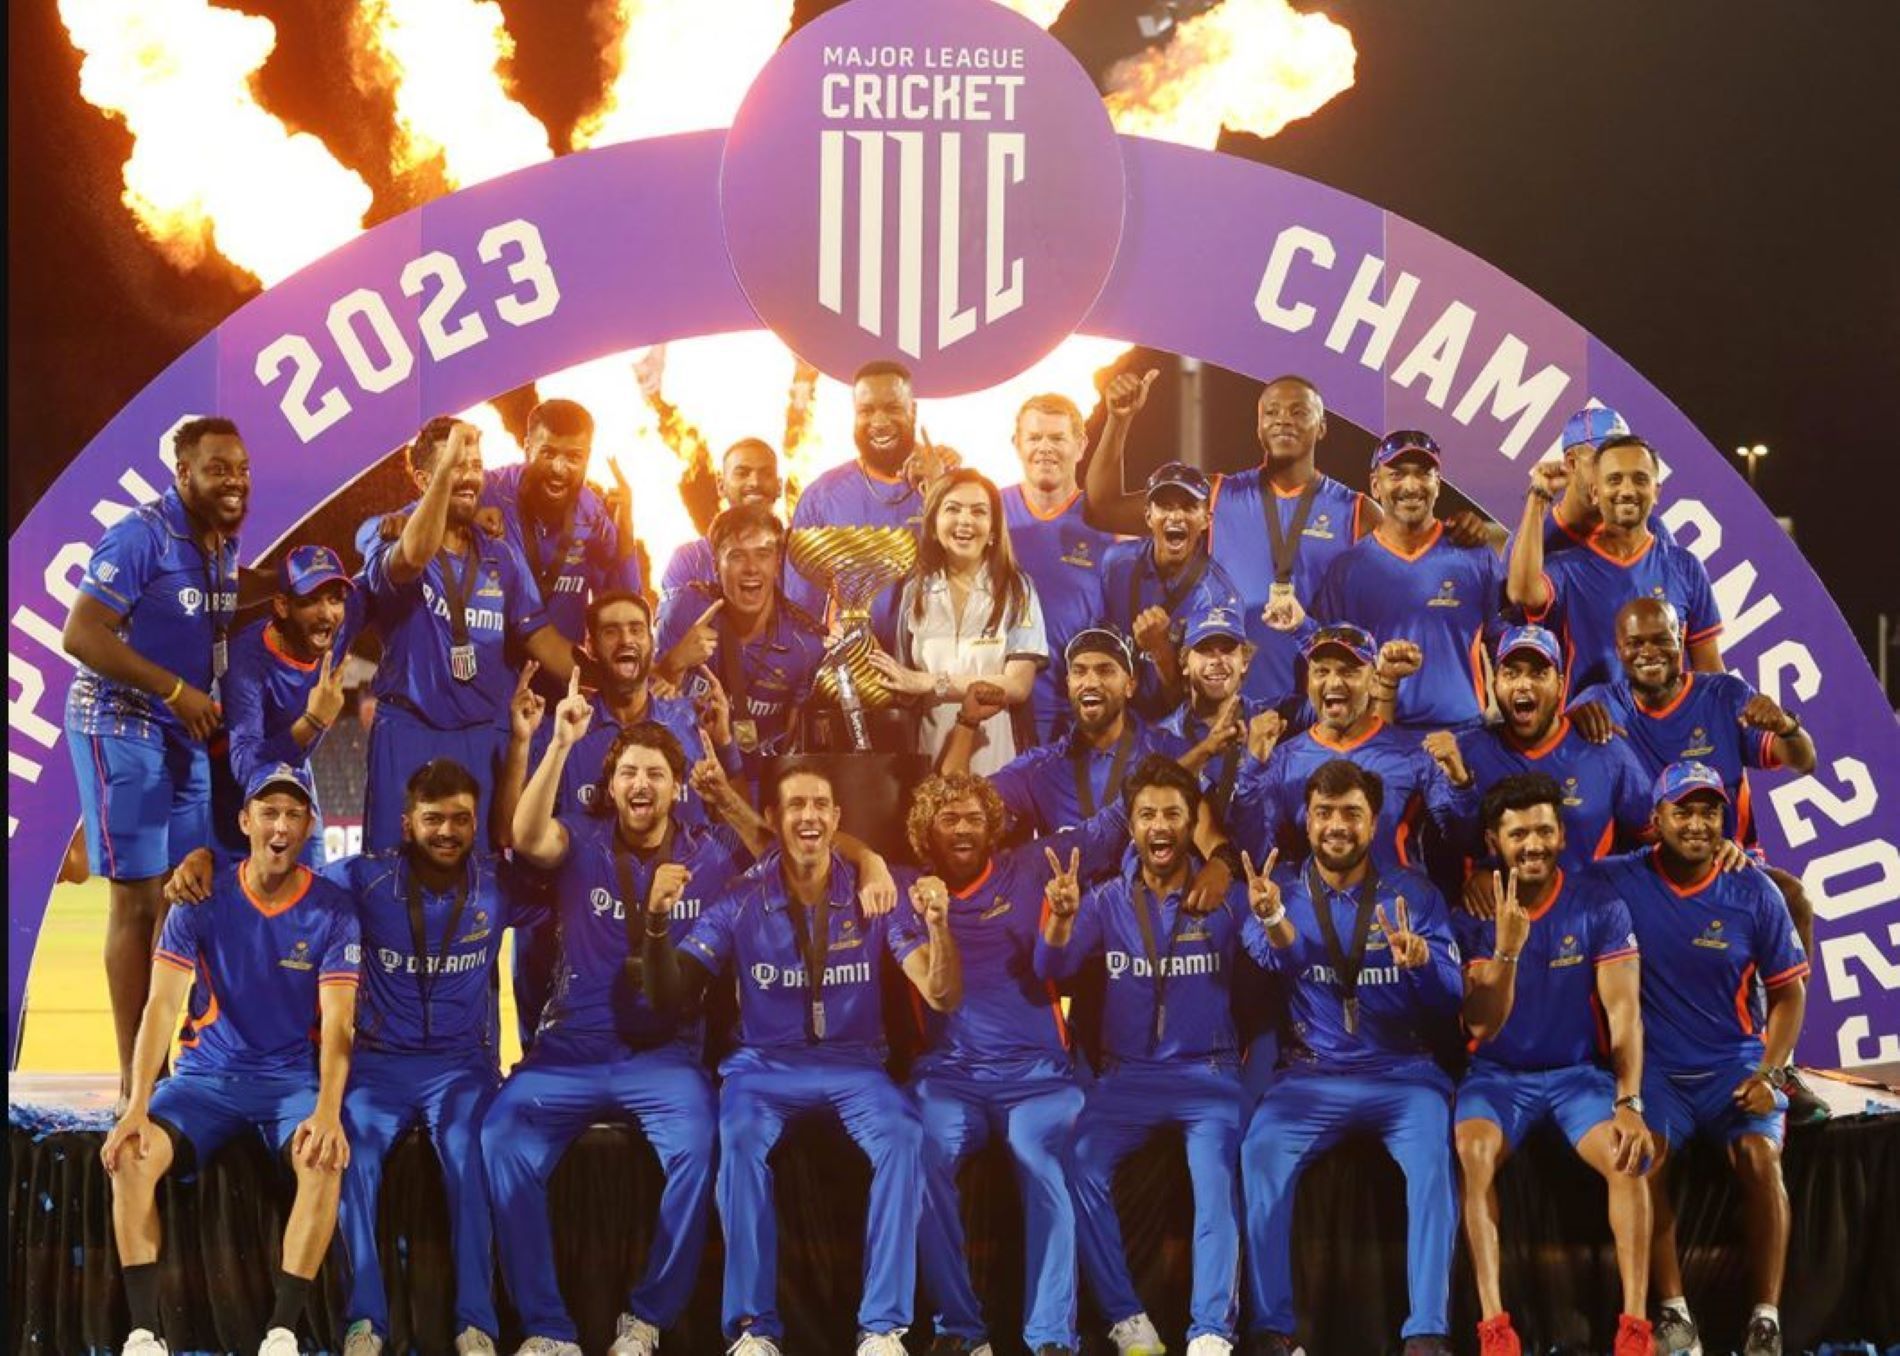 MI NY were basked in celebrations after winning the inaugural MLC title.